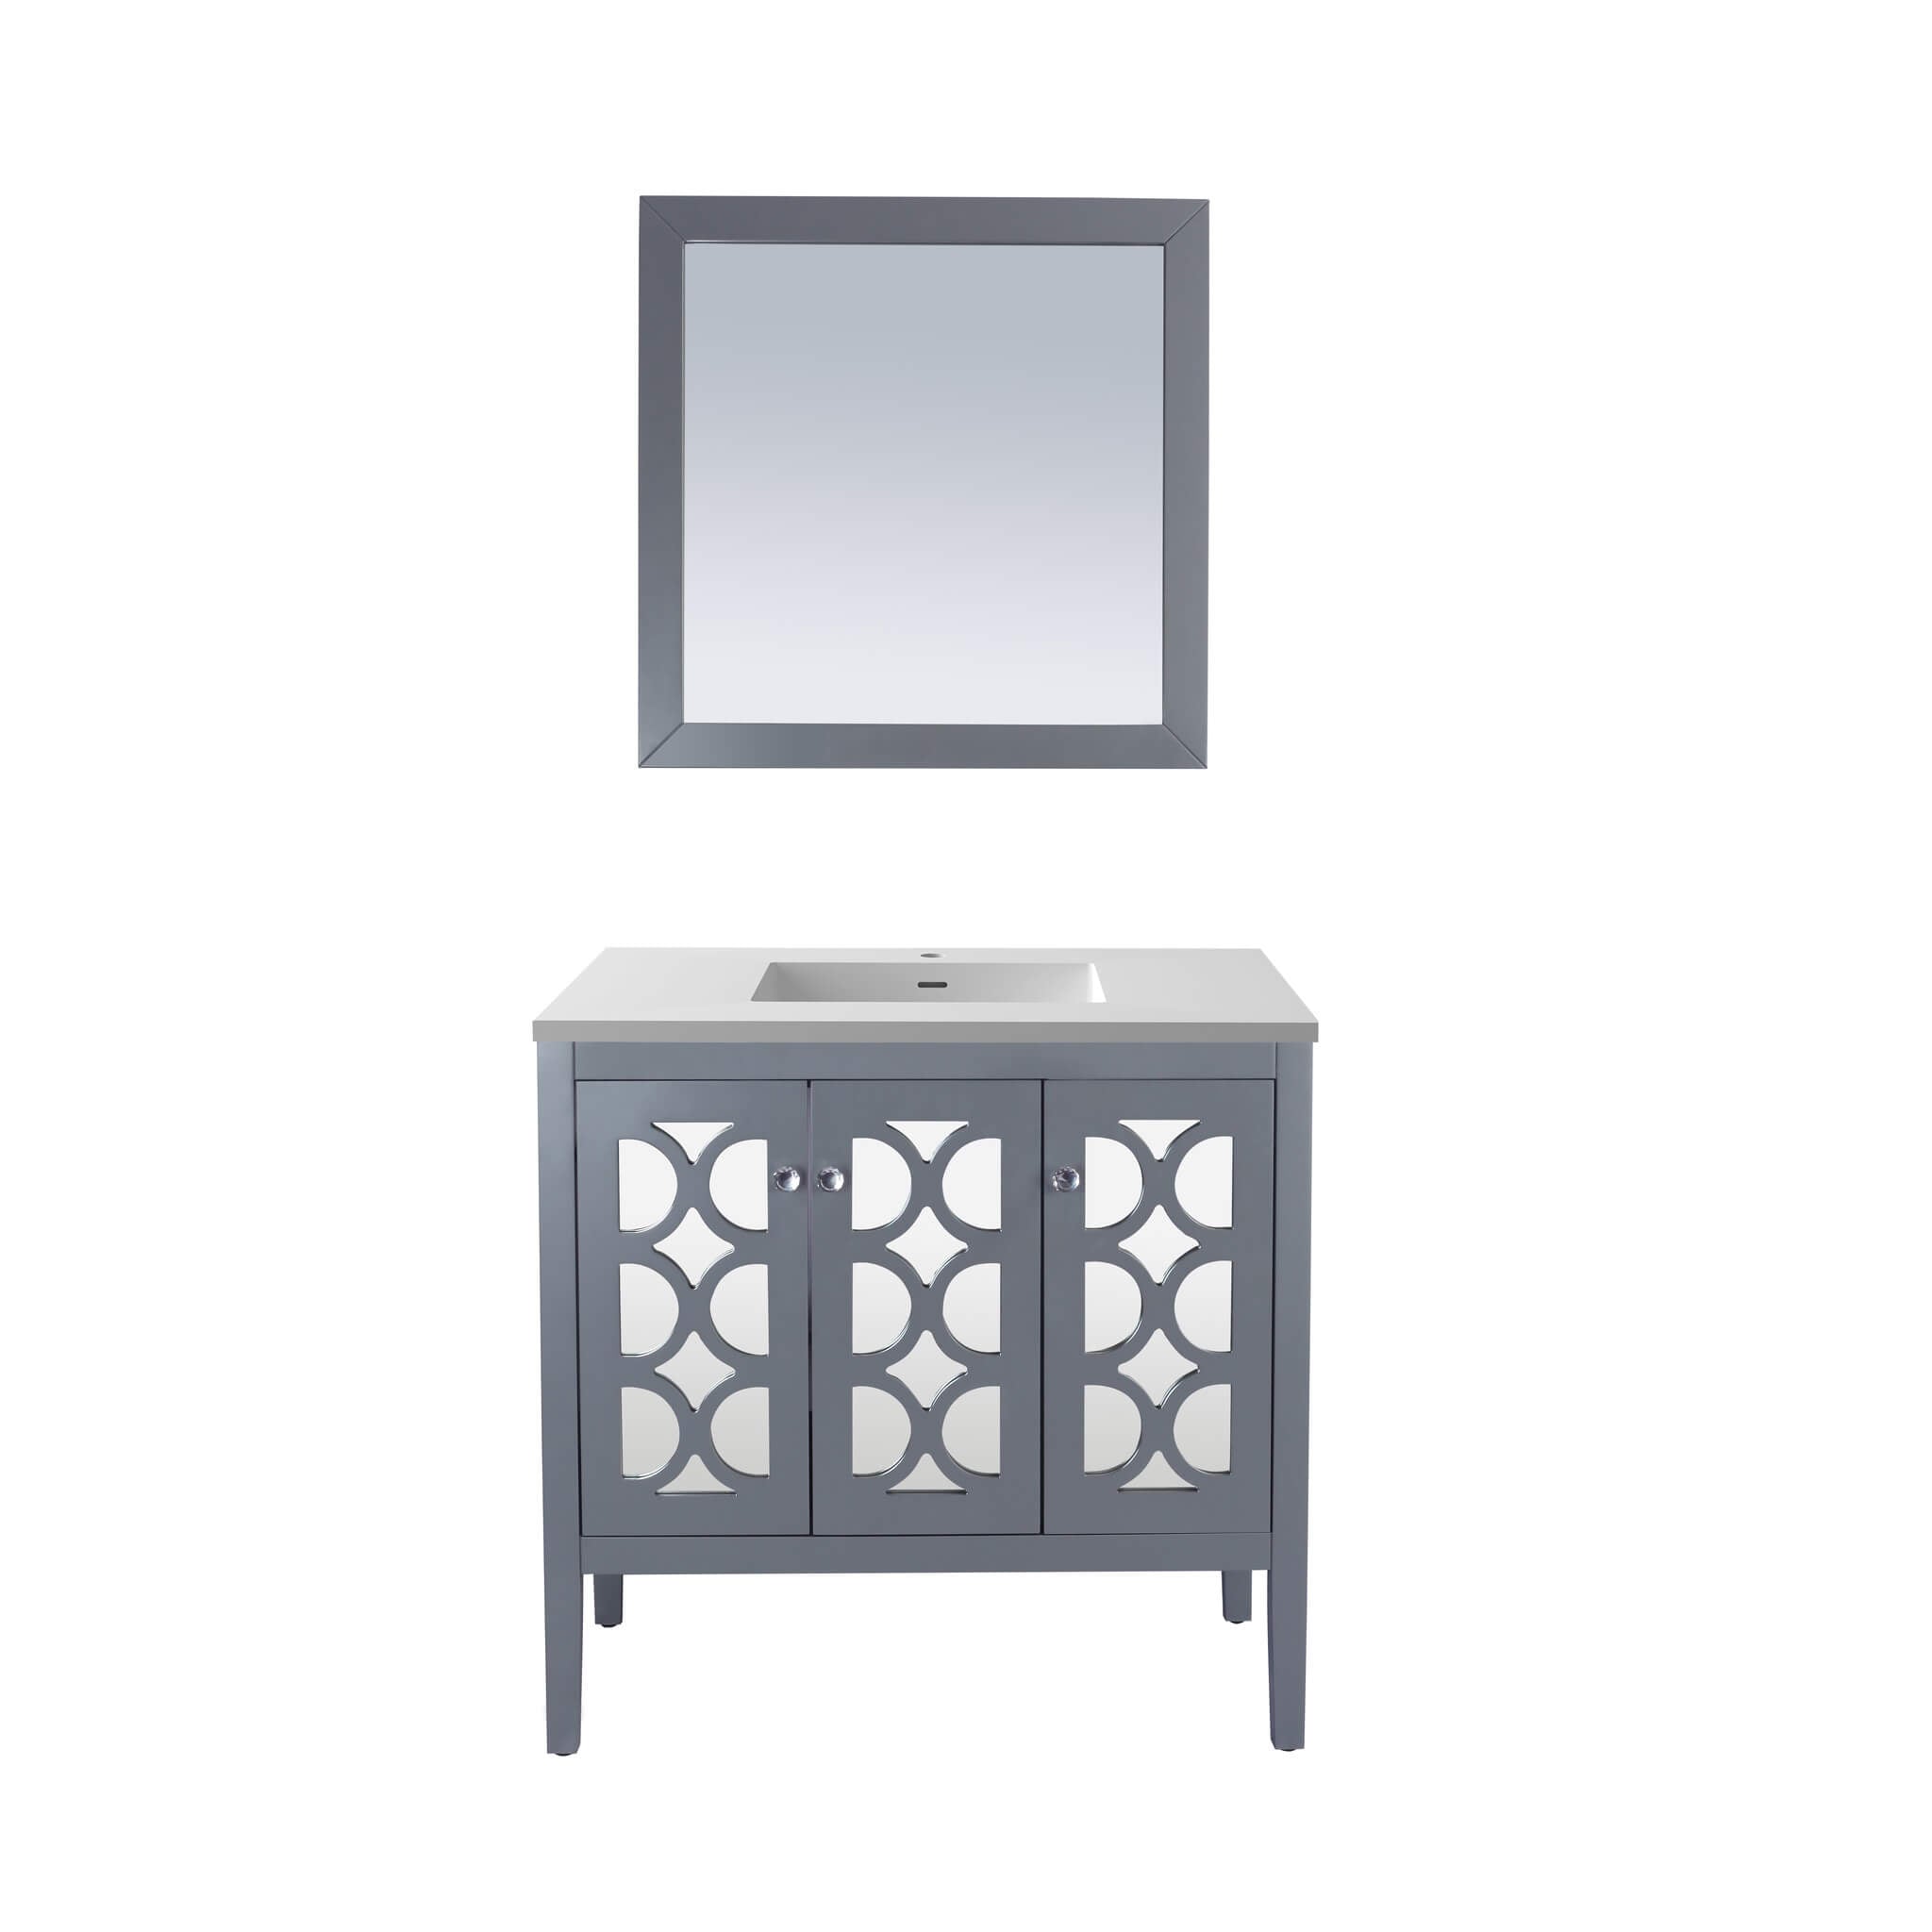 LAVIVA Mediterraneo 313MKSH-36G-MW 36" Single Bathroom Vanity in Grey with Matte White VIVA Stone Surface, Integrated Sink, Front View